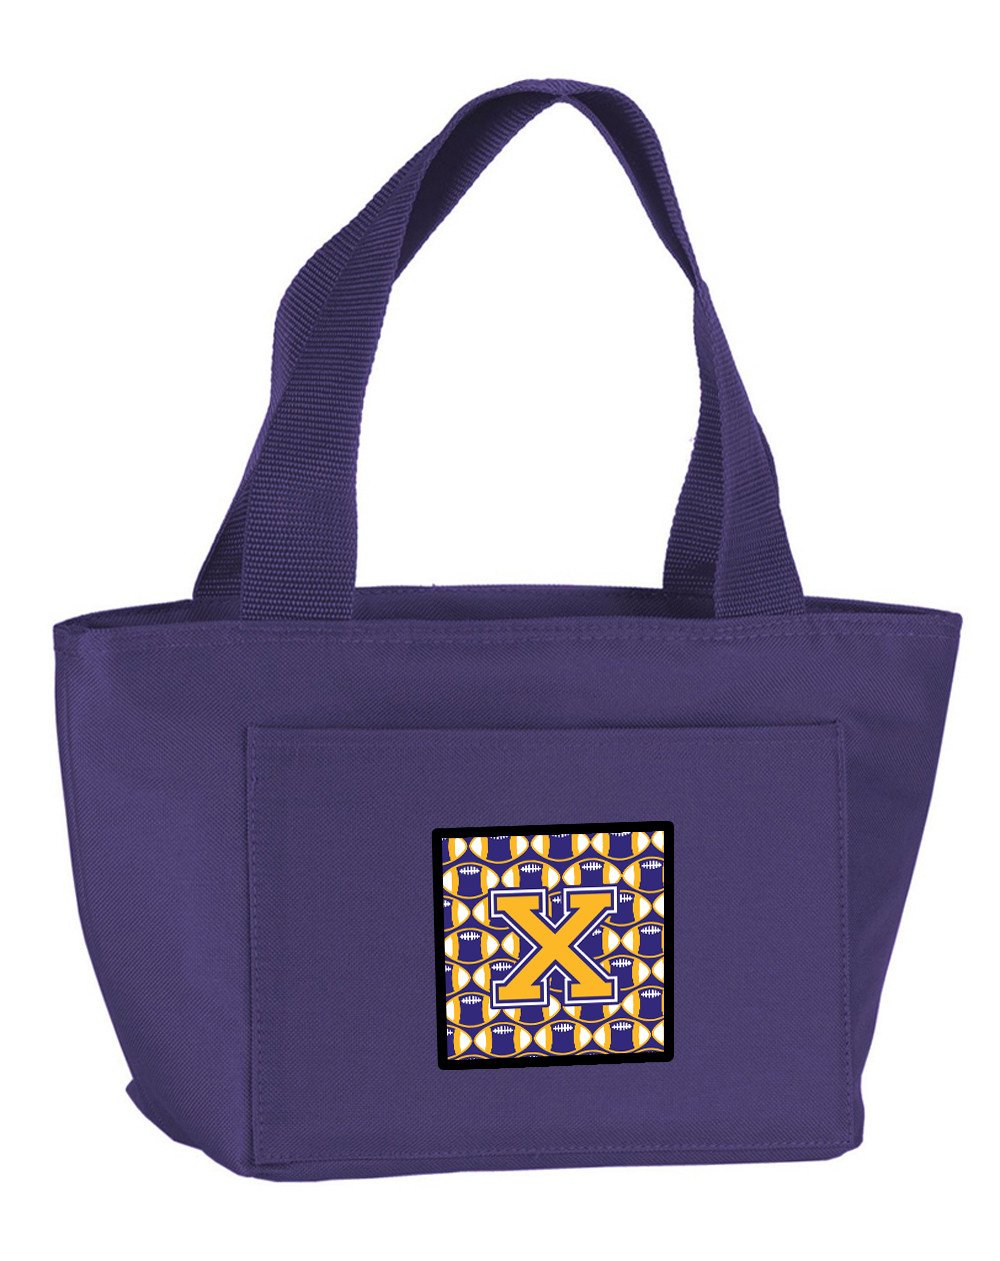 Letter X Football Purple and Gold Lunch Bag CJ1064-XPR-8808 by Caroline's Treasures